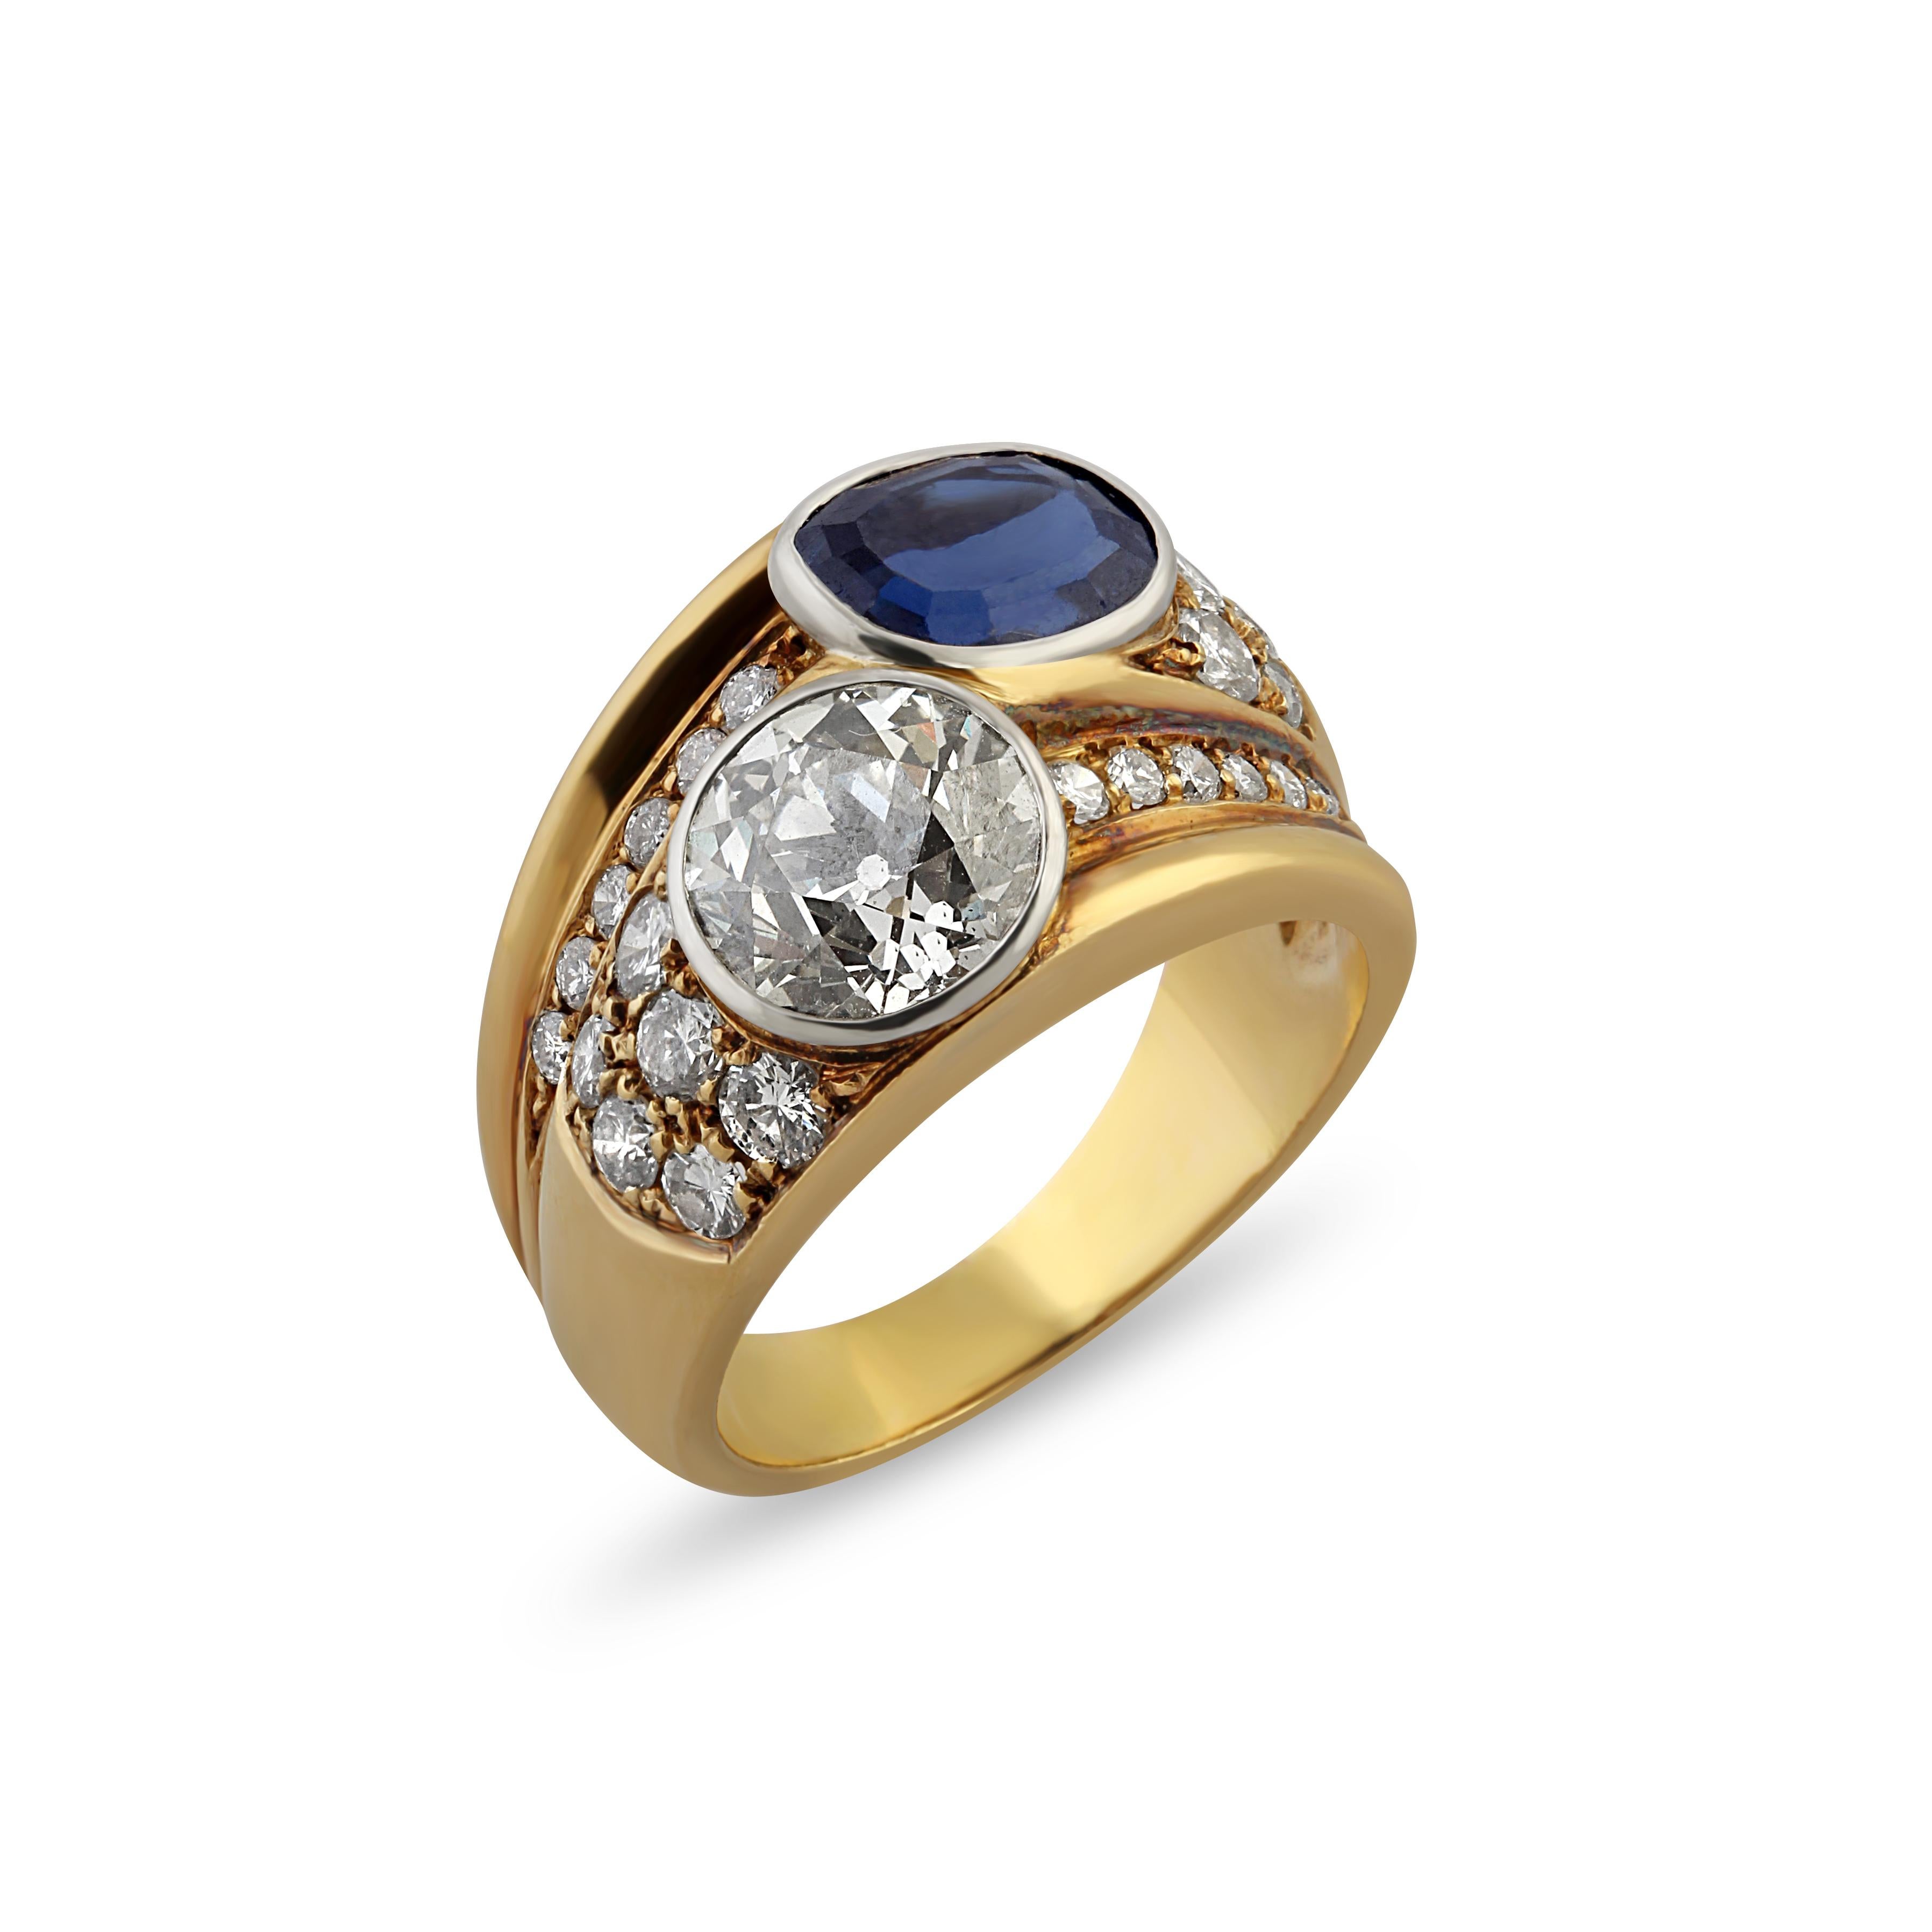 An 18k gold sapphire and diamond ring set with a round cut diamond and cushion cut sapphire surrounded by pavé set diamonds. Origin: Italy.
